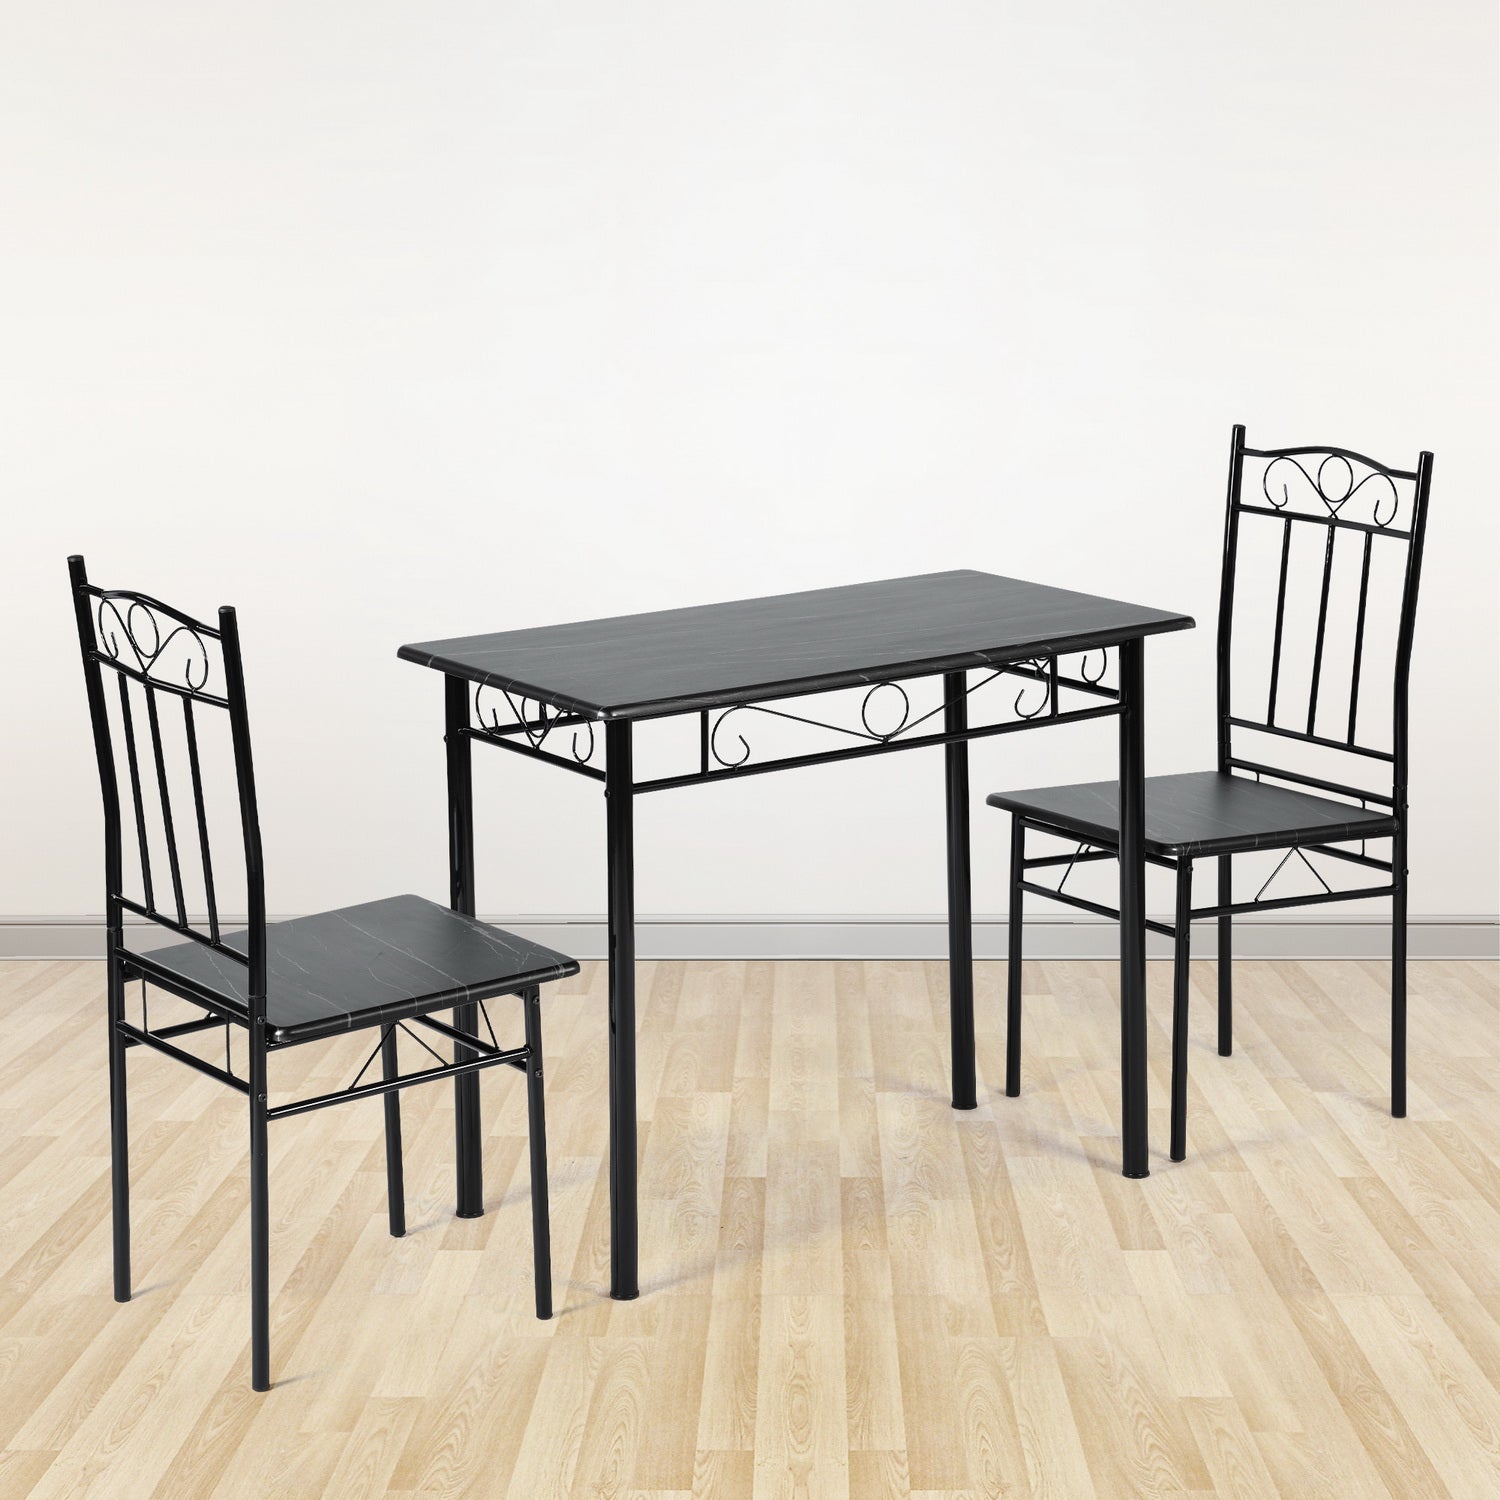 NORSEMAN Marbling Dining Table with 2 Chairs Set - 90*48*75cm - White/Black